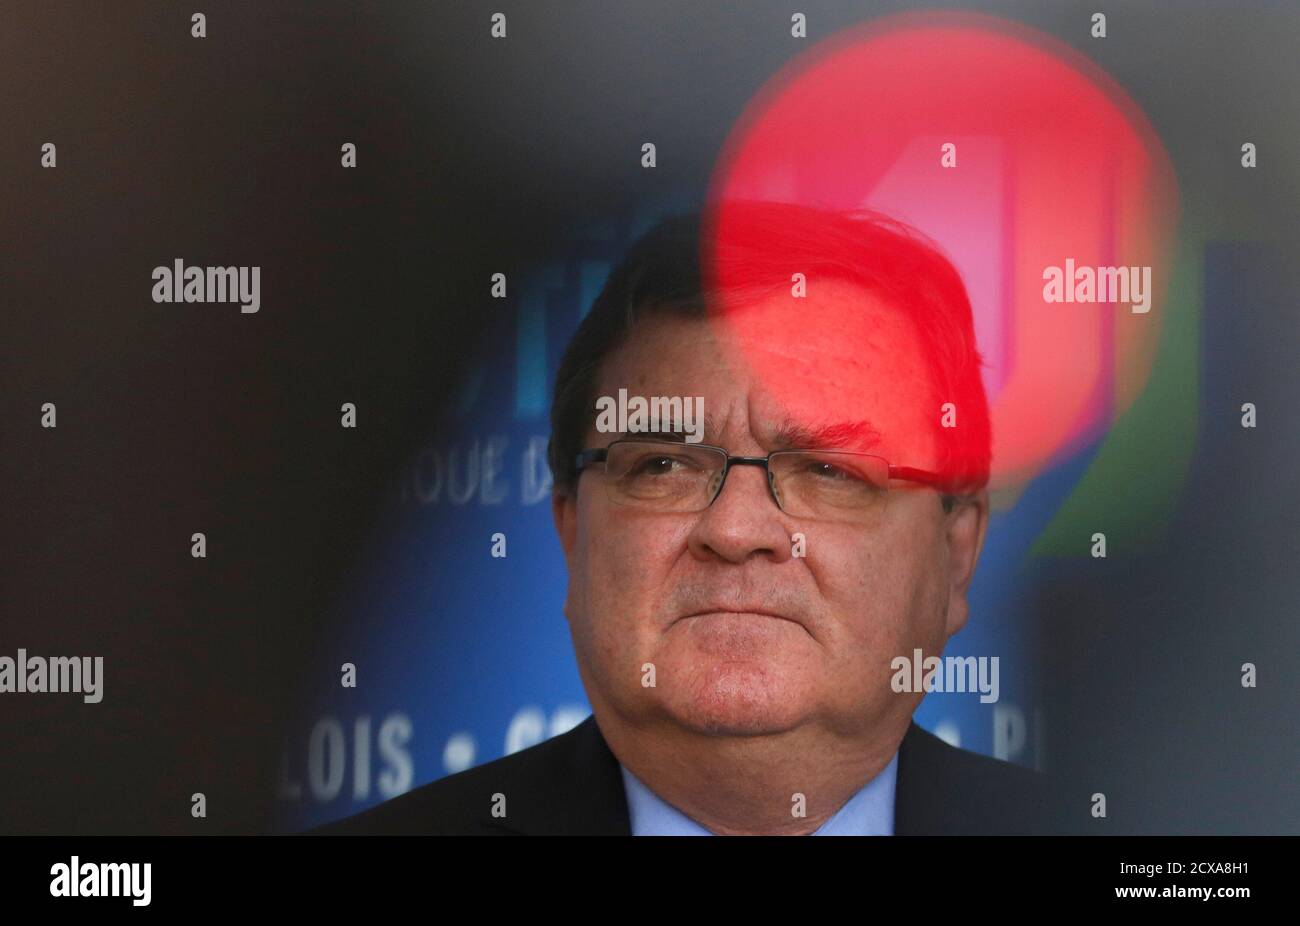 Canada's Finance Minister Jim Flaherty is framed between a cameraman and a television camera while listening to a question from a journalist after meeting with private sector economists in Ottawa March 8, 2013.  Private sector economists have cut their growth forecasts for the Canadian economy in 2013 due to volatile market conditions in the United States and Europe, Flaherty said on Friday. REUTERS/Chris Wattie (CANADA - Tags: POLITICS BUSINESS) Stock Photo